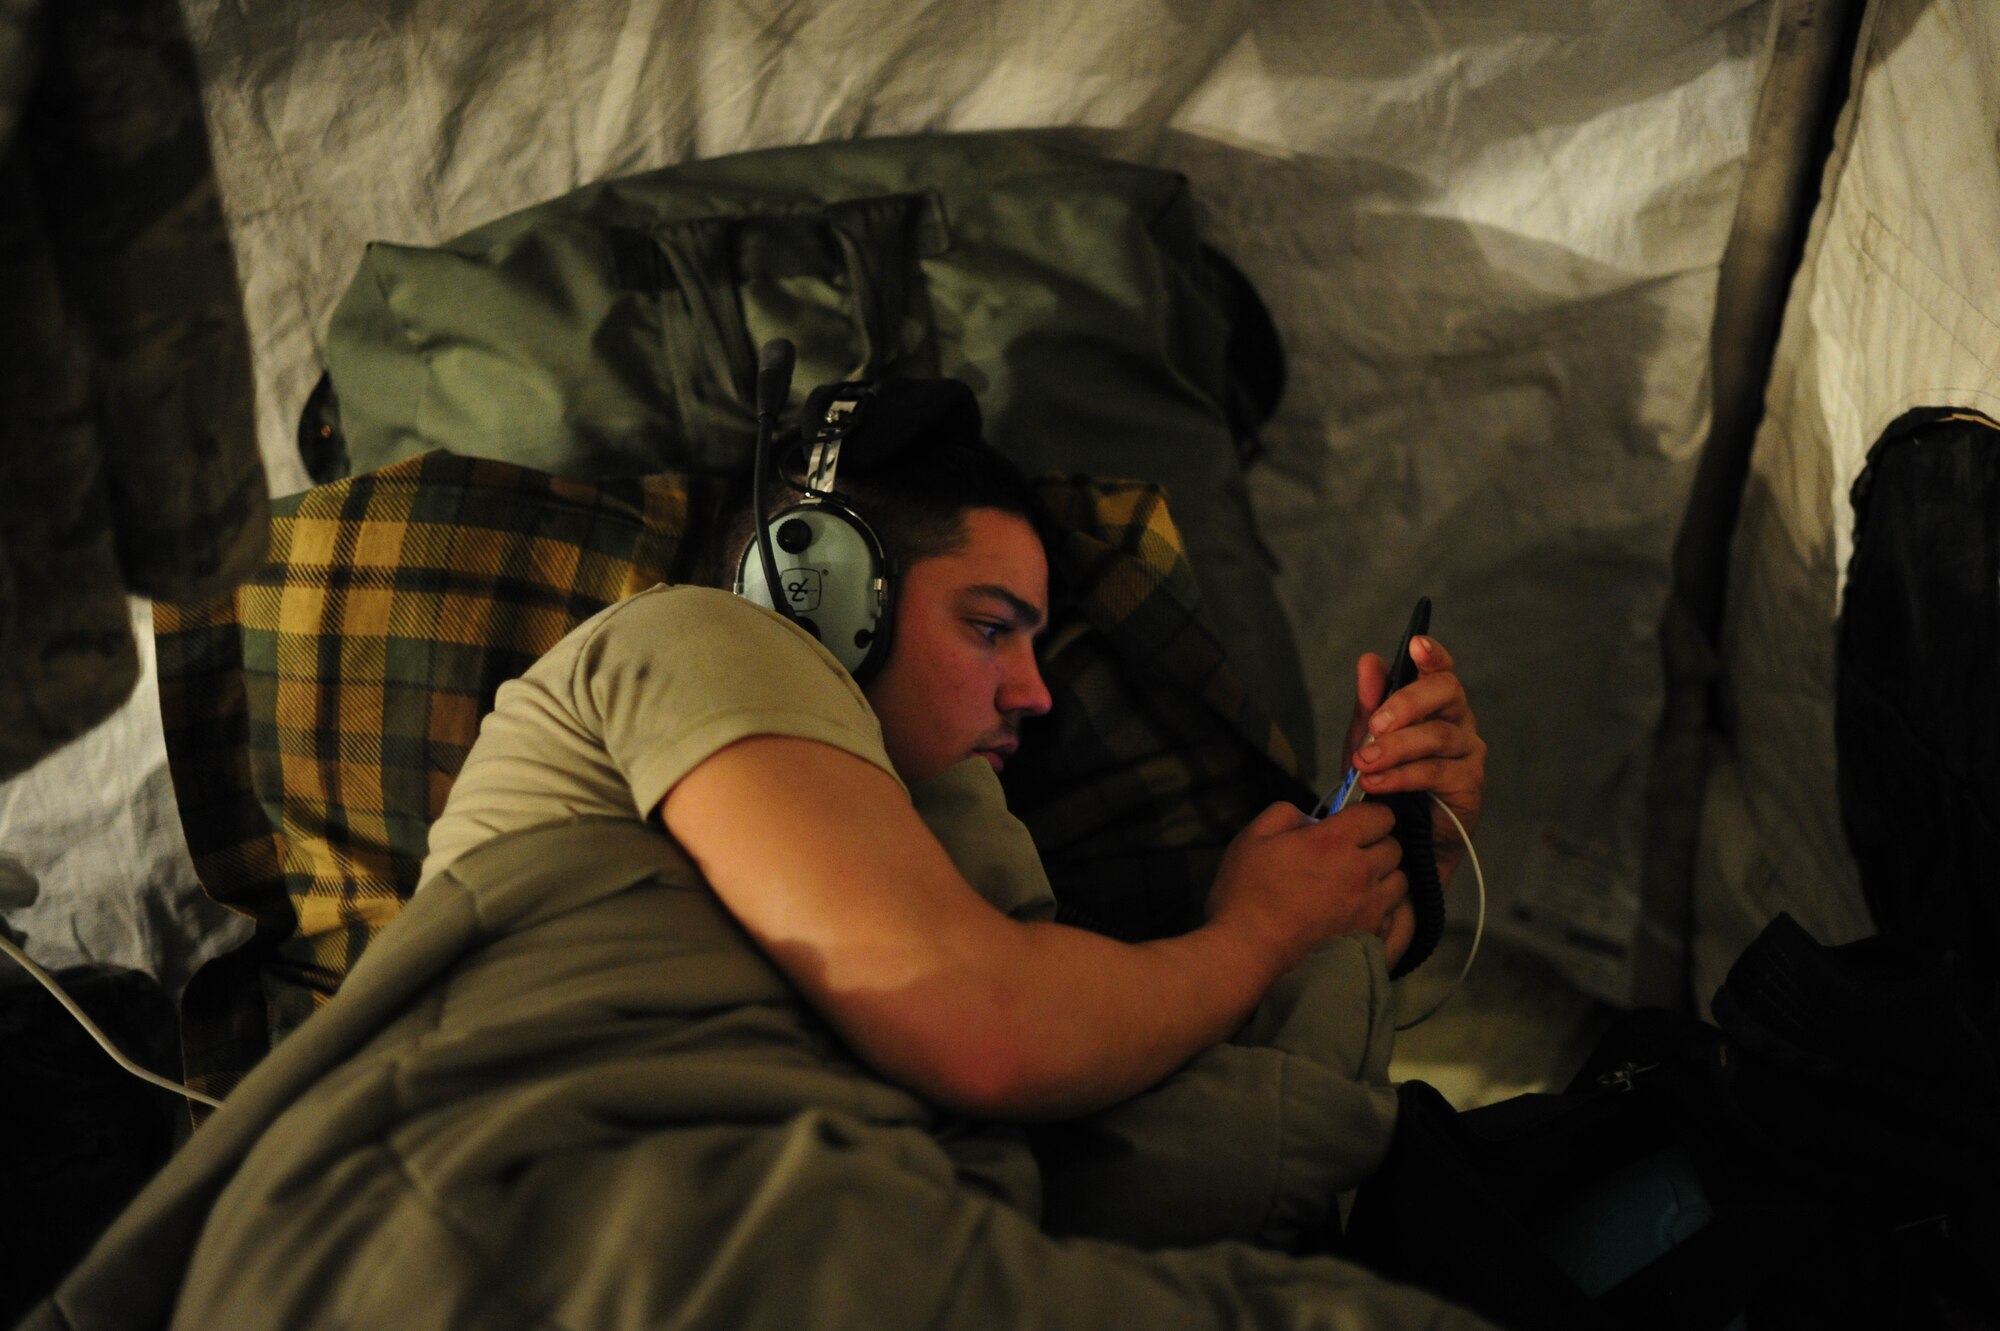 JOINT BASE MCGUIRE-DIX-LAKEHURST, N.J. -- U.S. Air Force Airman 1st Class Jeffery Wood, aircraft maintenance journeyman assigned to the 621st Contingency Response Wing at JB MDL, rests in his cot after a 12-hour shift during Eagle Flag 13-2 March 21, 2013. The camp for the Airmen was established close the base’s active runway, and the constant arrival and departure of C-17 Globemaster III airlifters made it difficult to sleep.  (U.S. Air Force photo by Tech. Sgt. Parker Gyokeres/Released)